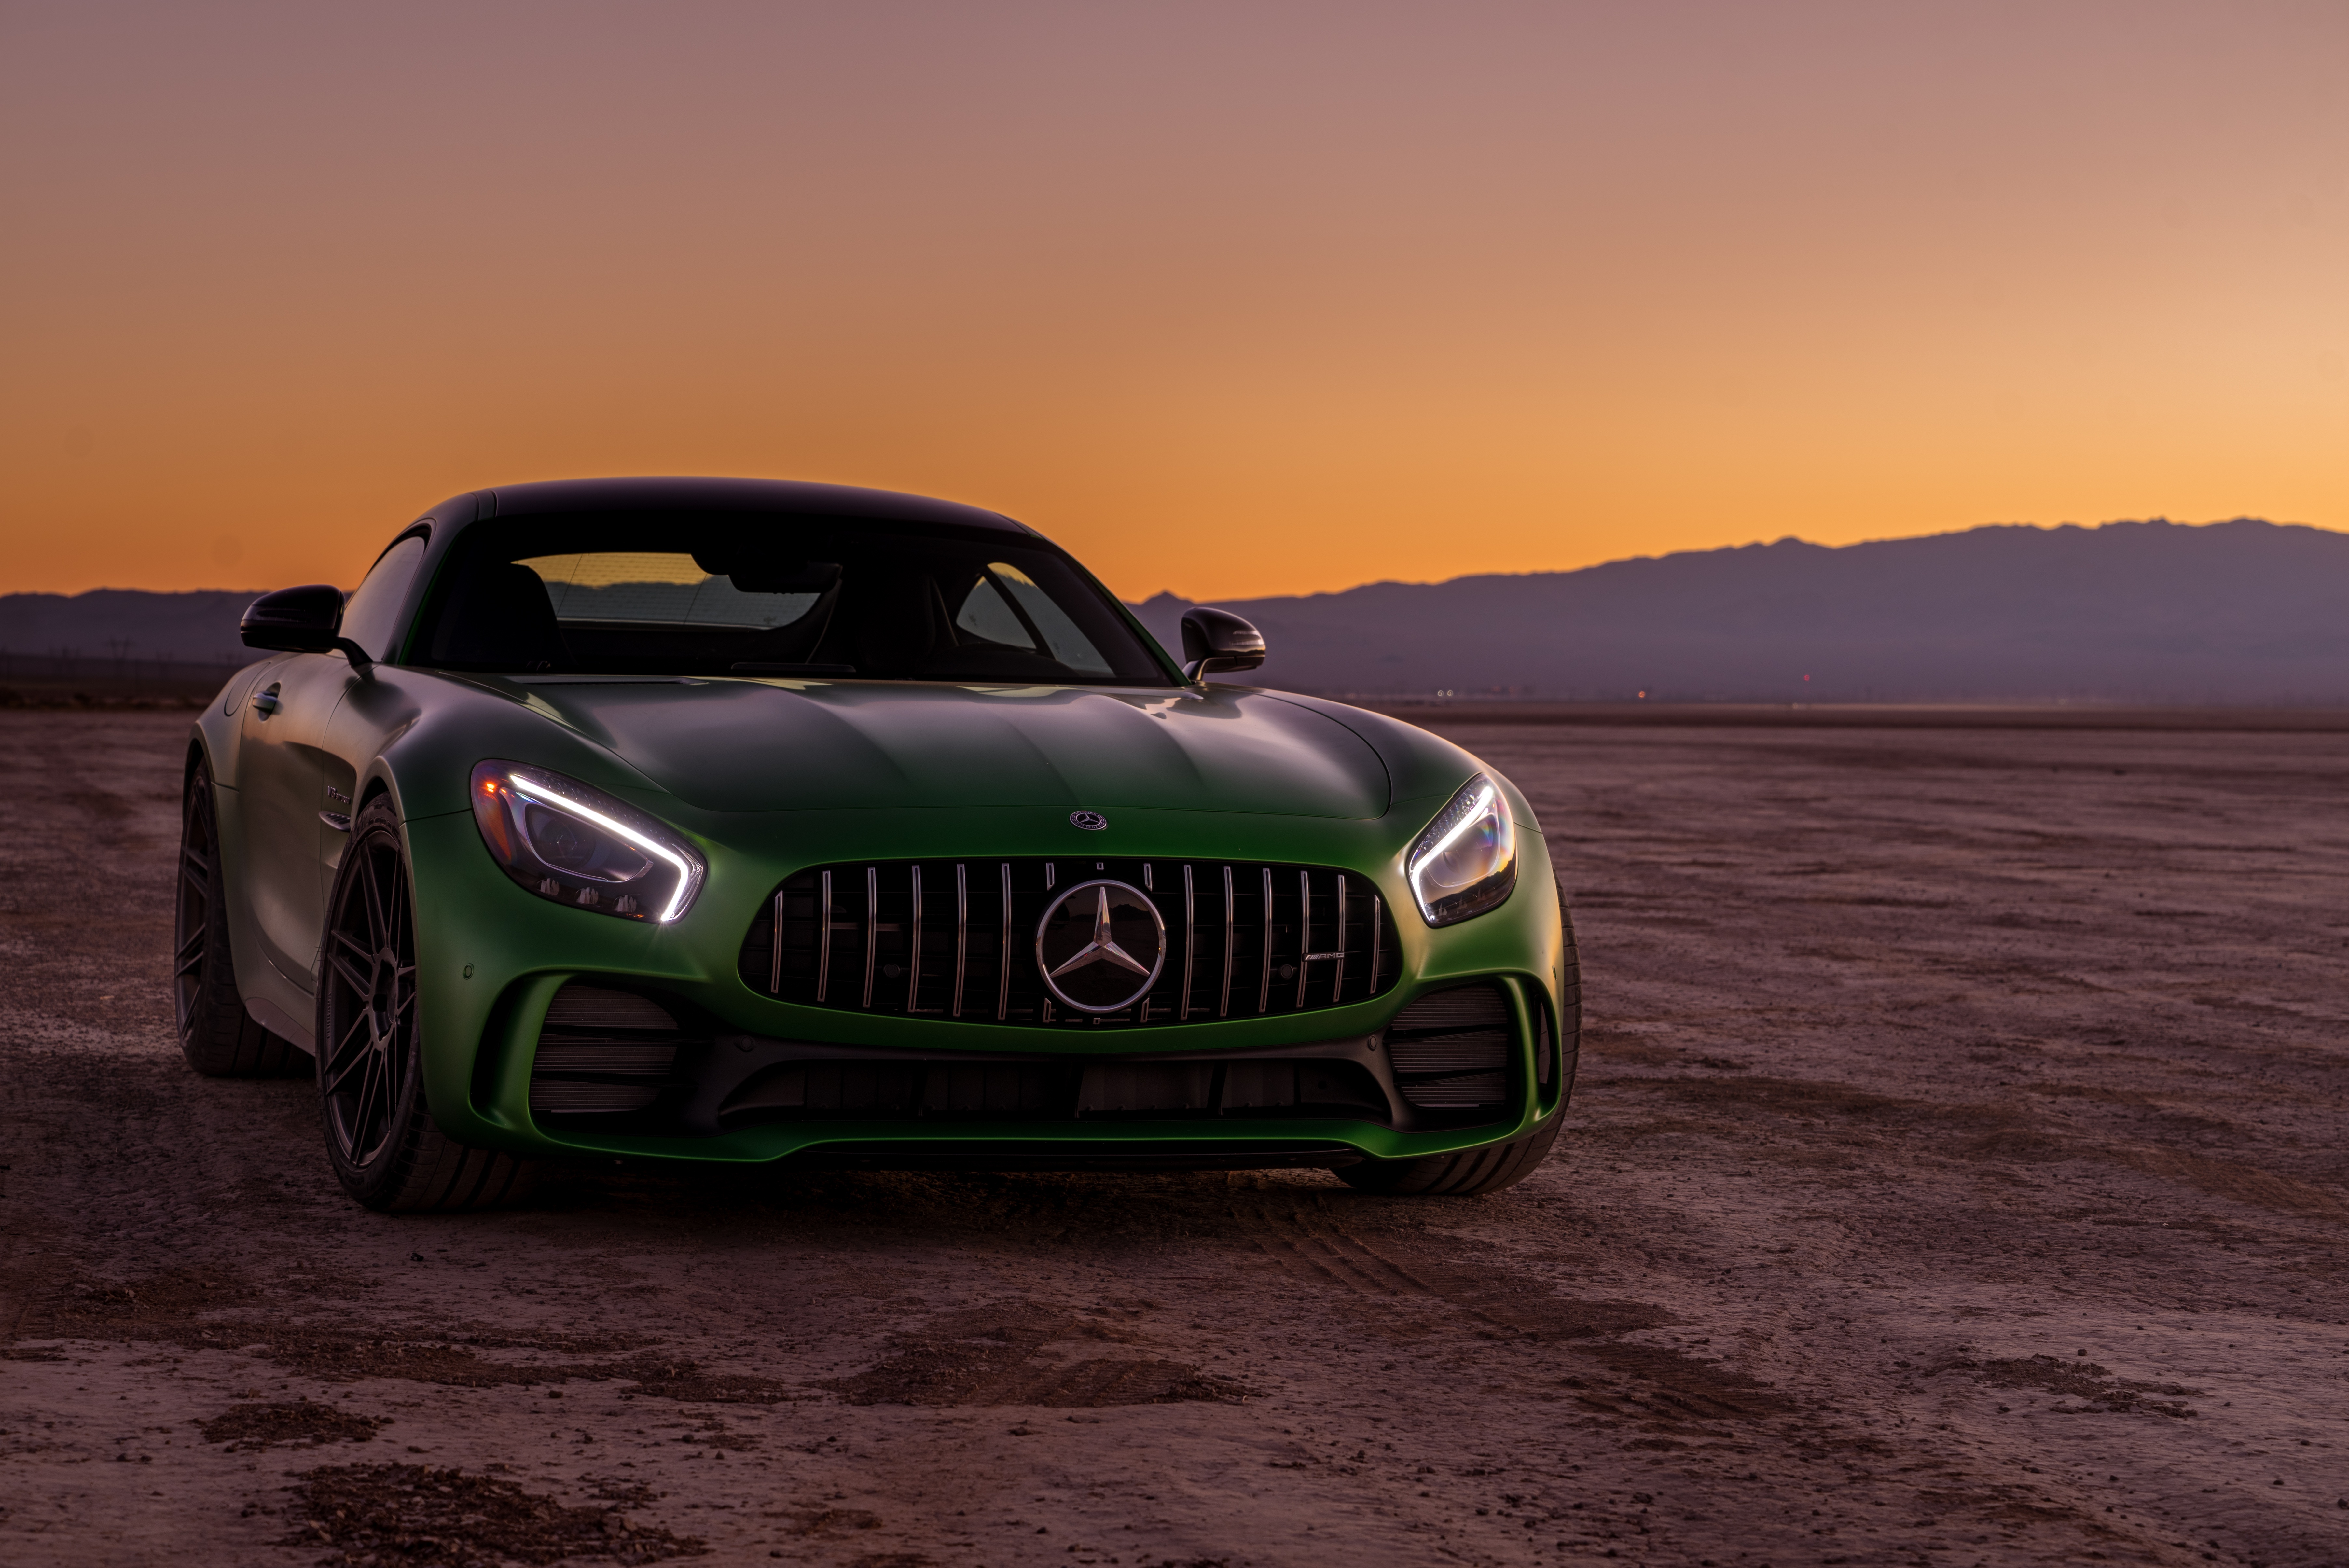 Mercedes Amg Gtr 8k, HD Cars, 4k Wallpapers, Images, Backgrounds